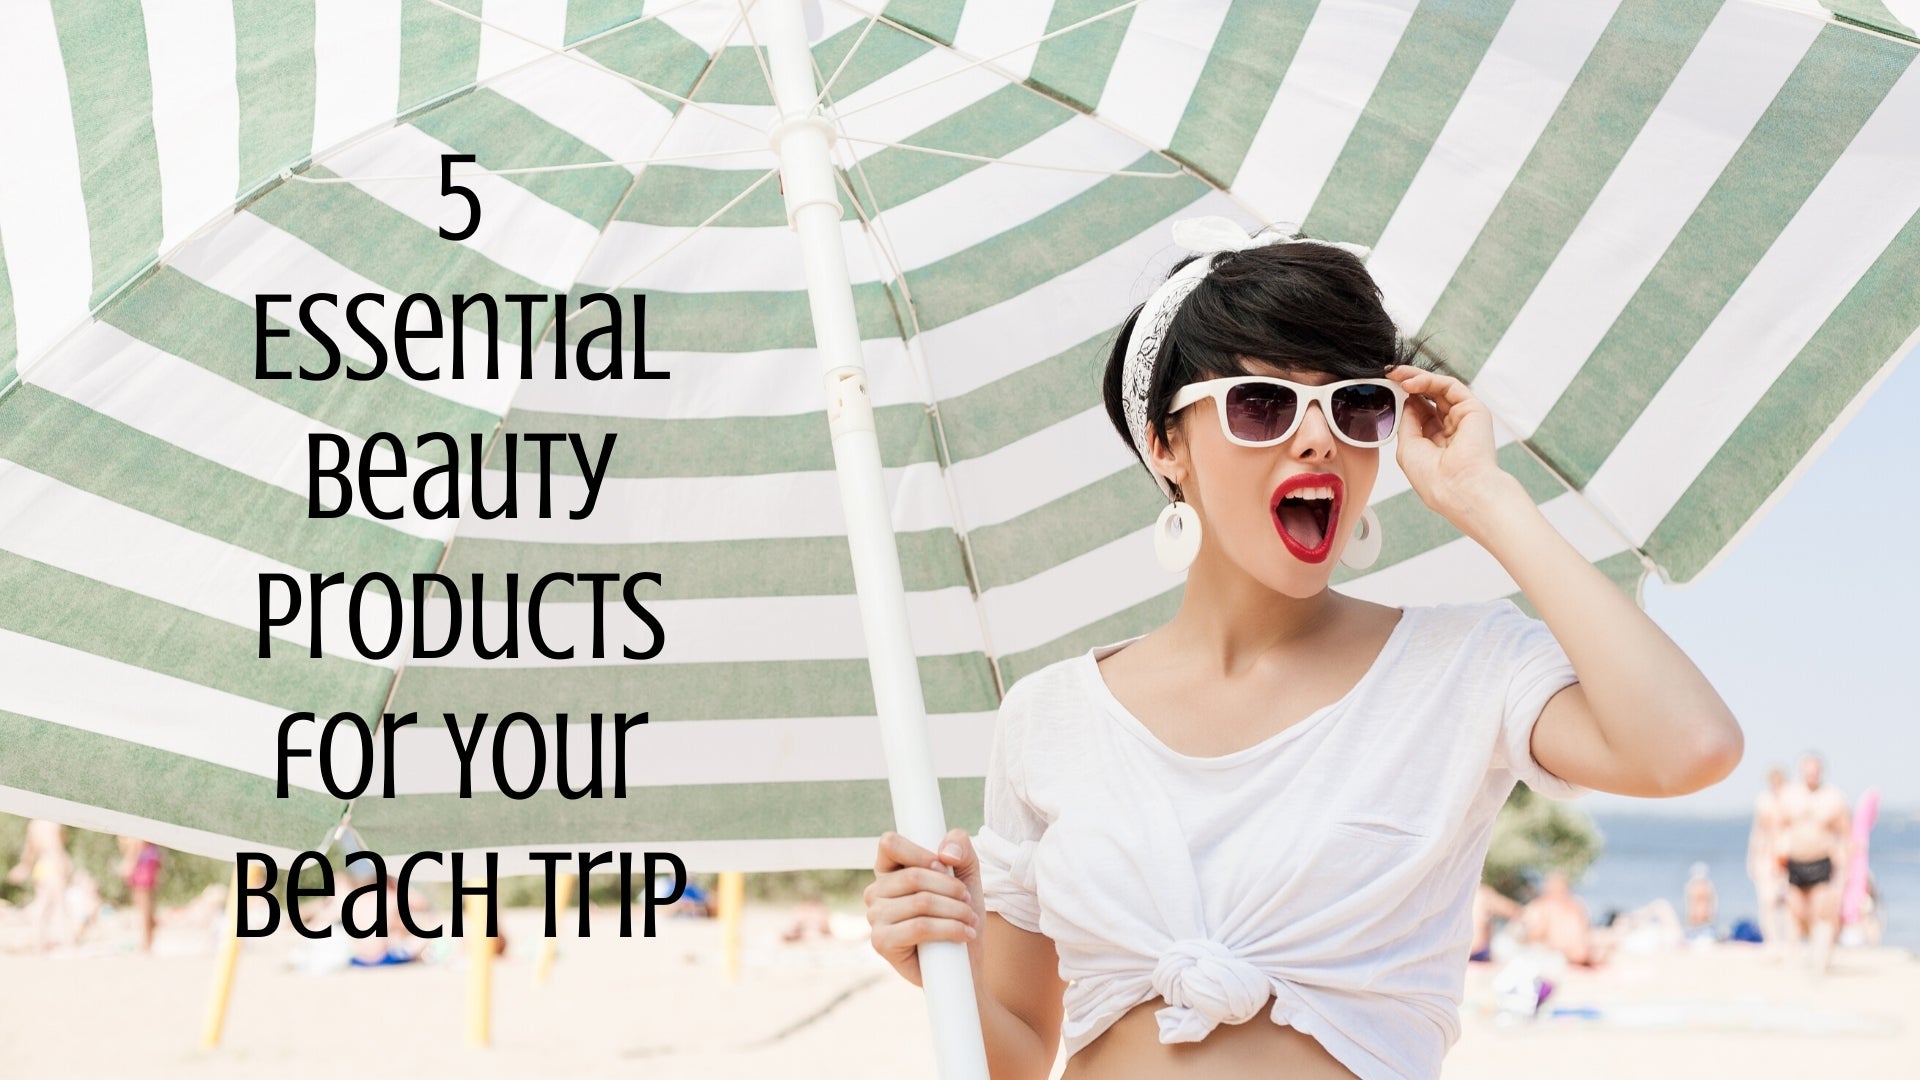 5 Essential Beauty Products for Your Beach Trip